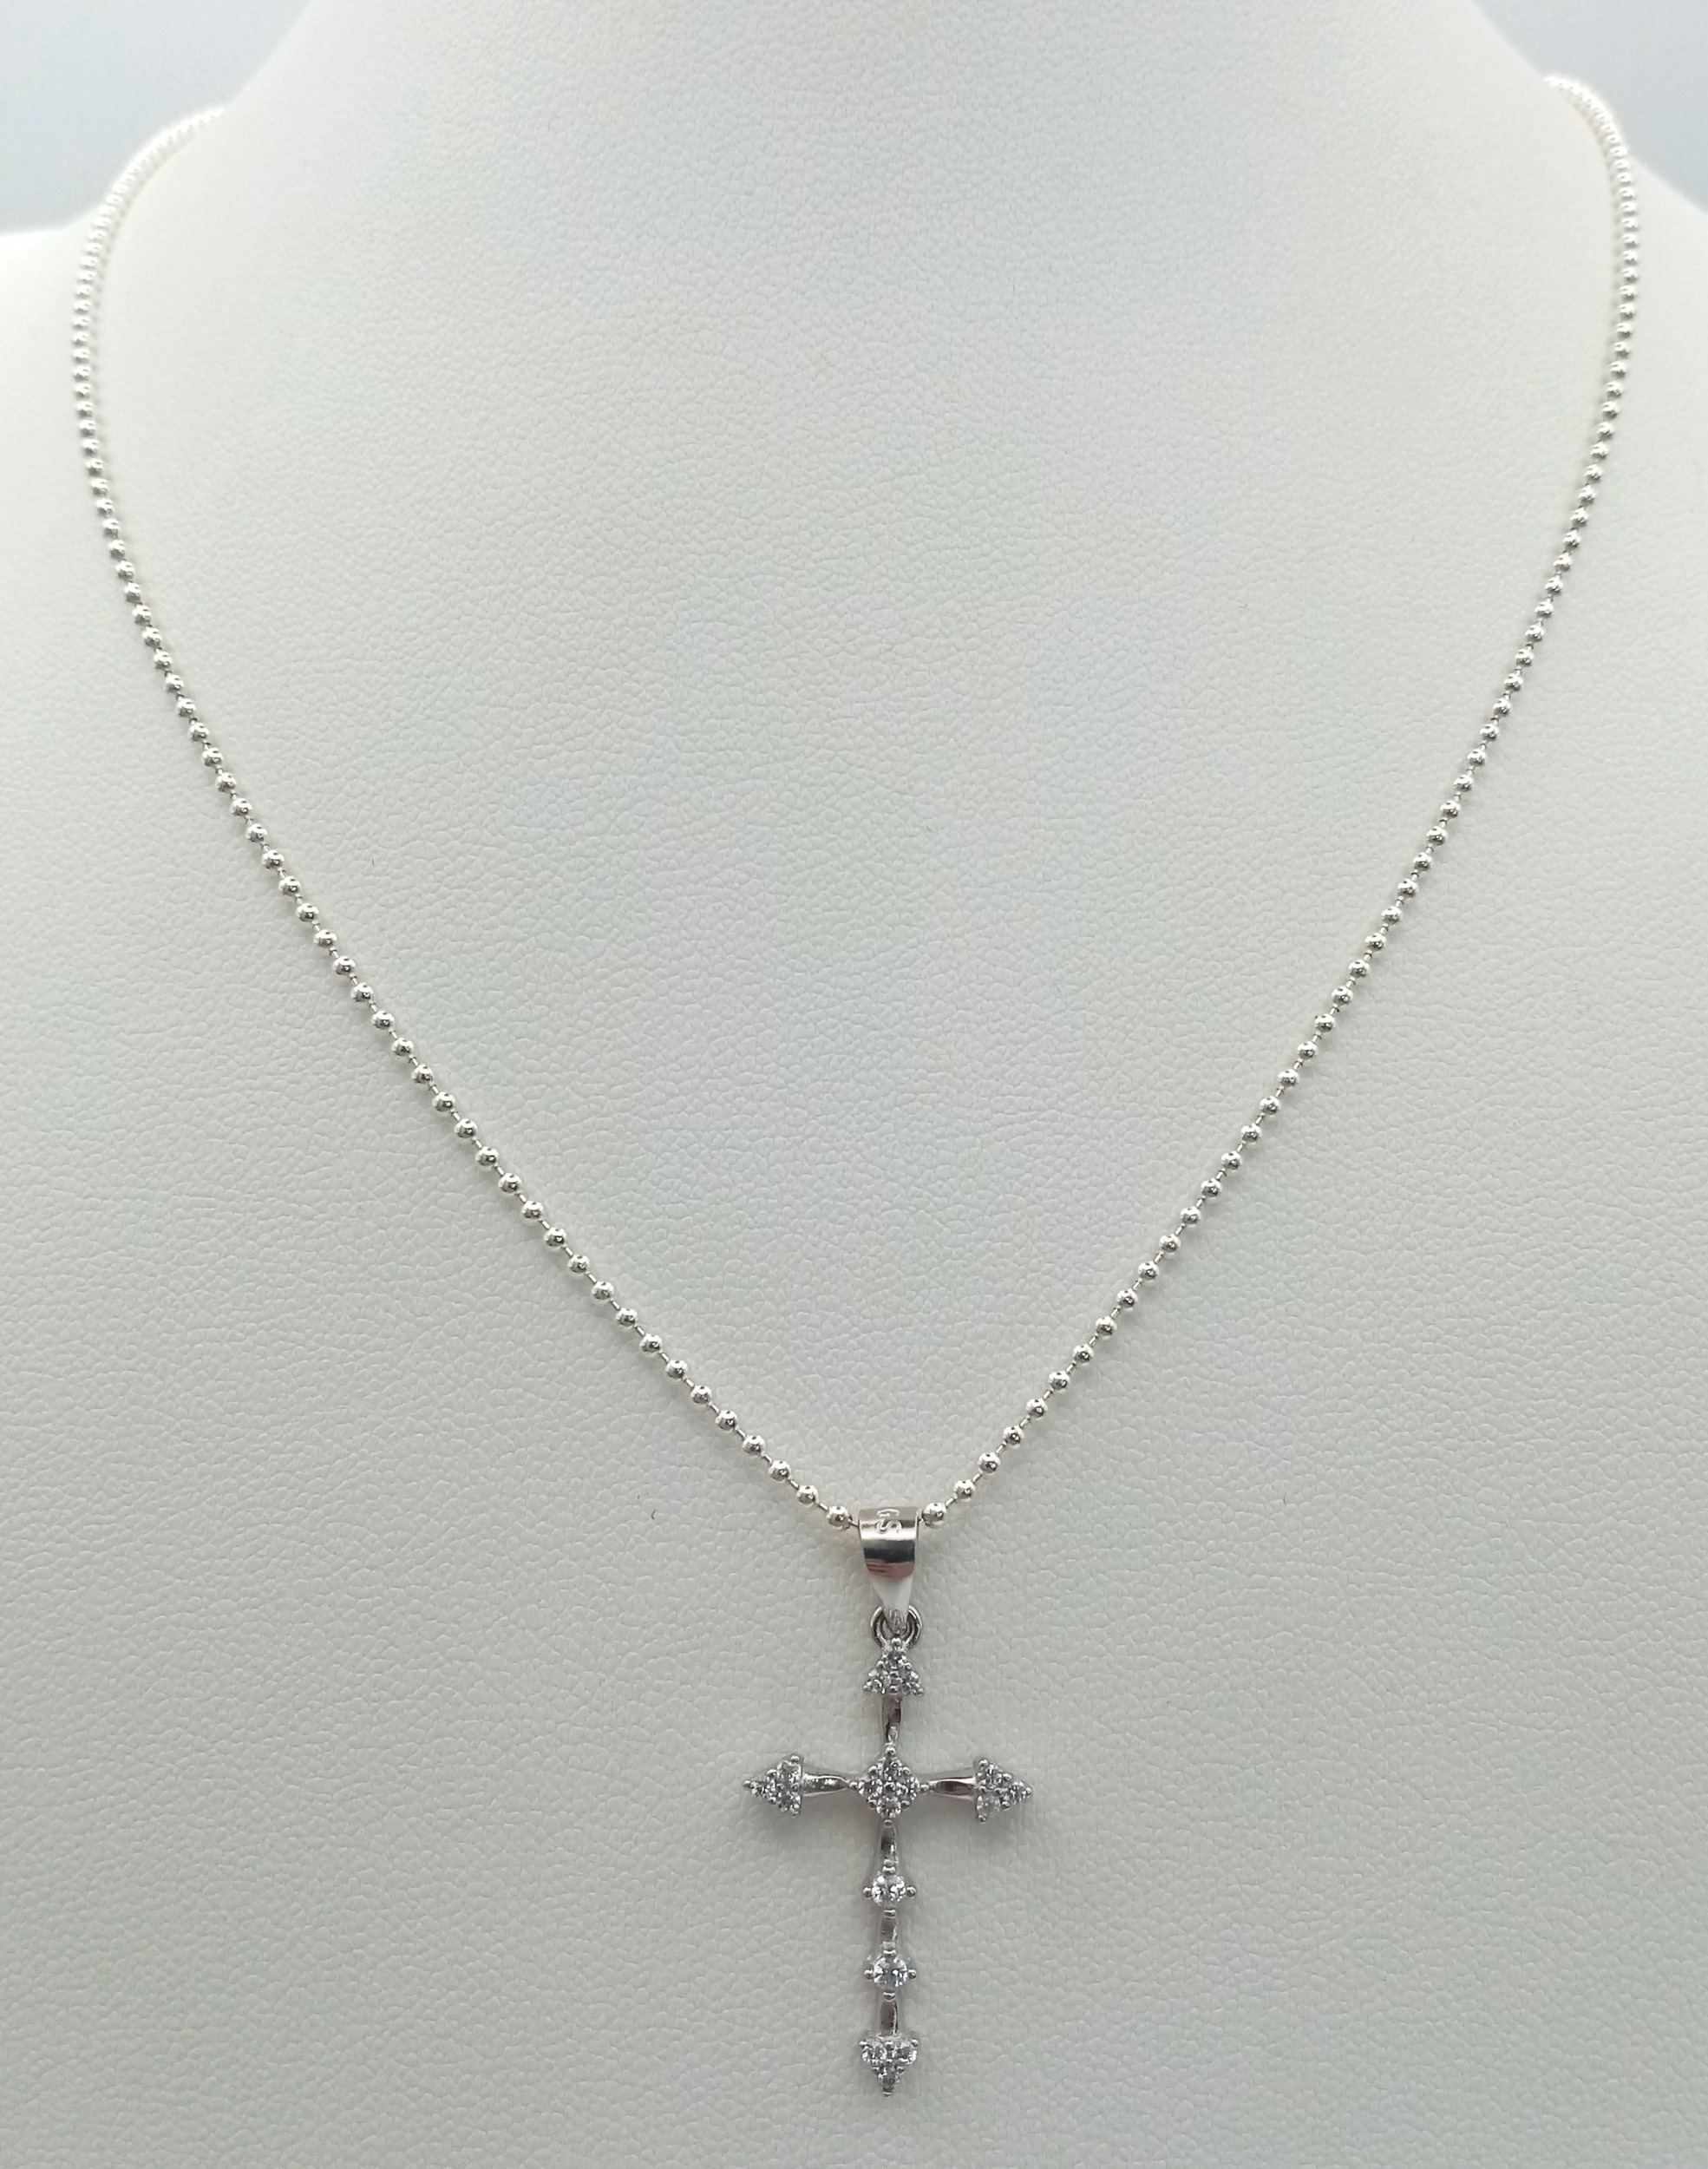 A 925 Silver Cross Pendant on a 925 Silver Chain. 3cm and 40cm. - Image 2 of 5